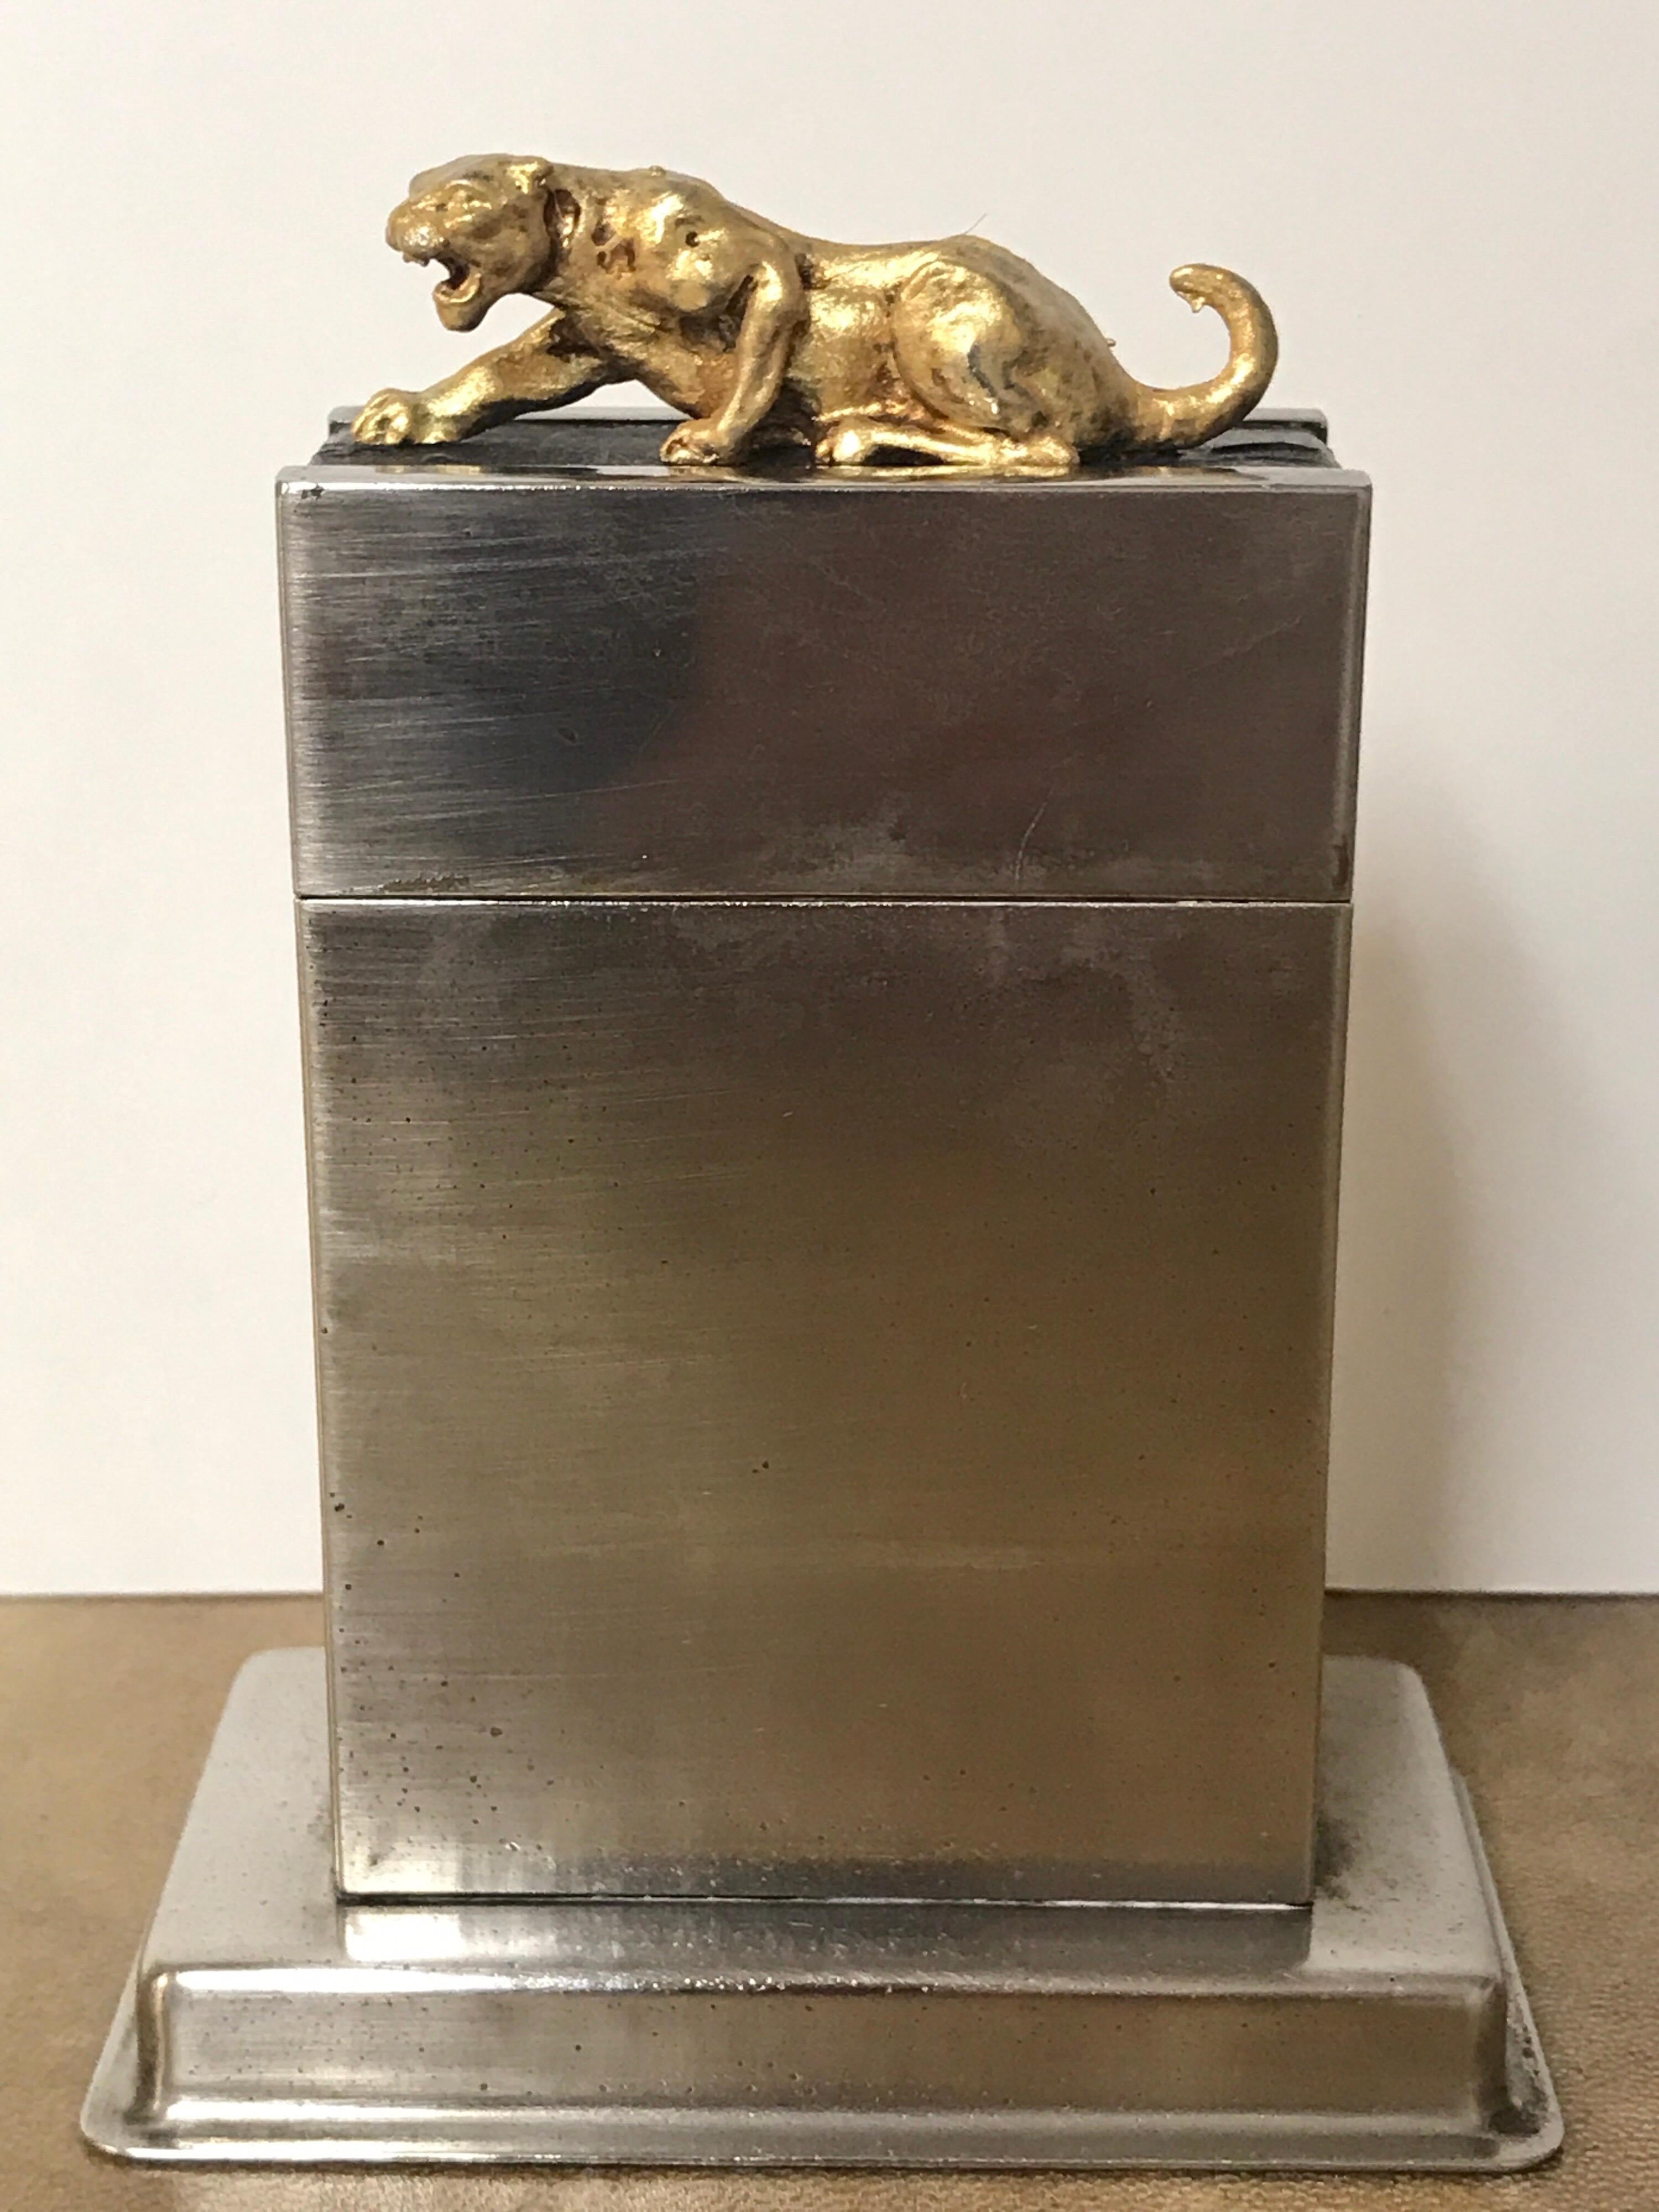 French Art Deco gunmetal and leather table box, of elongated rectangular form, the lid with a gilt crouching tiger resting on leather band. Wood lined, probably for cigarettes.